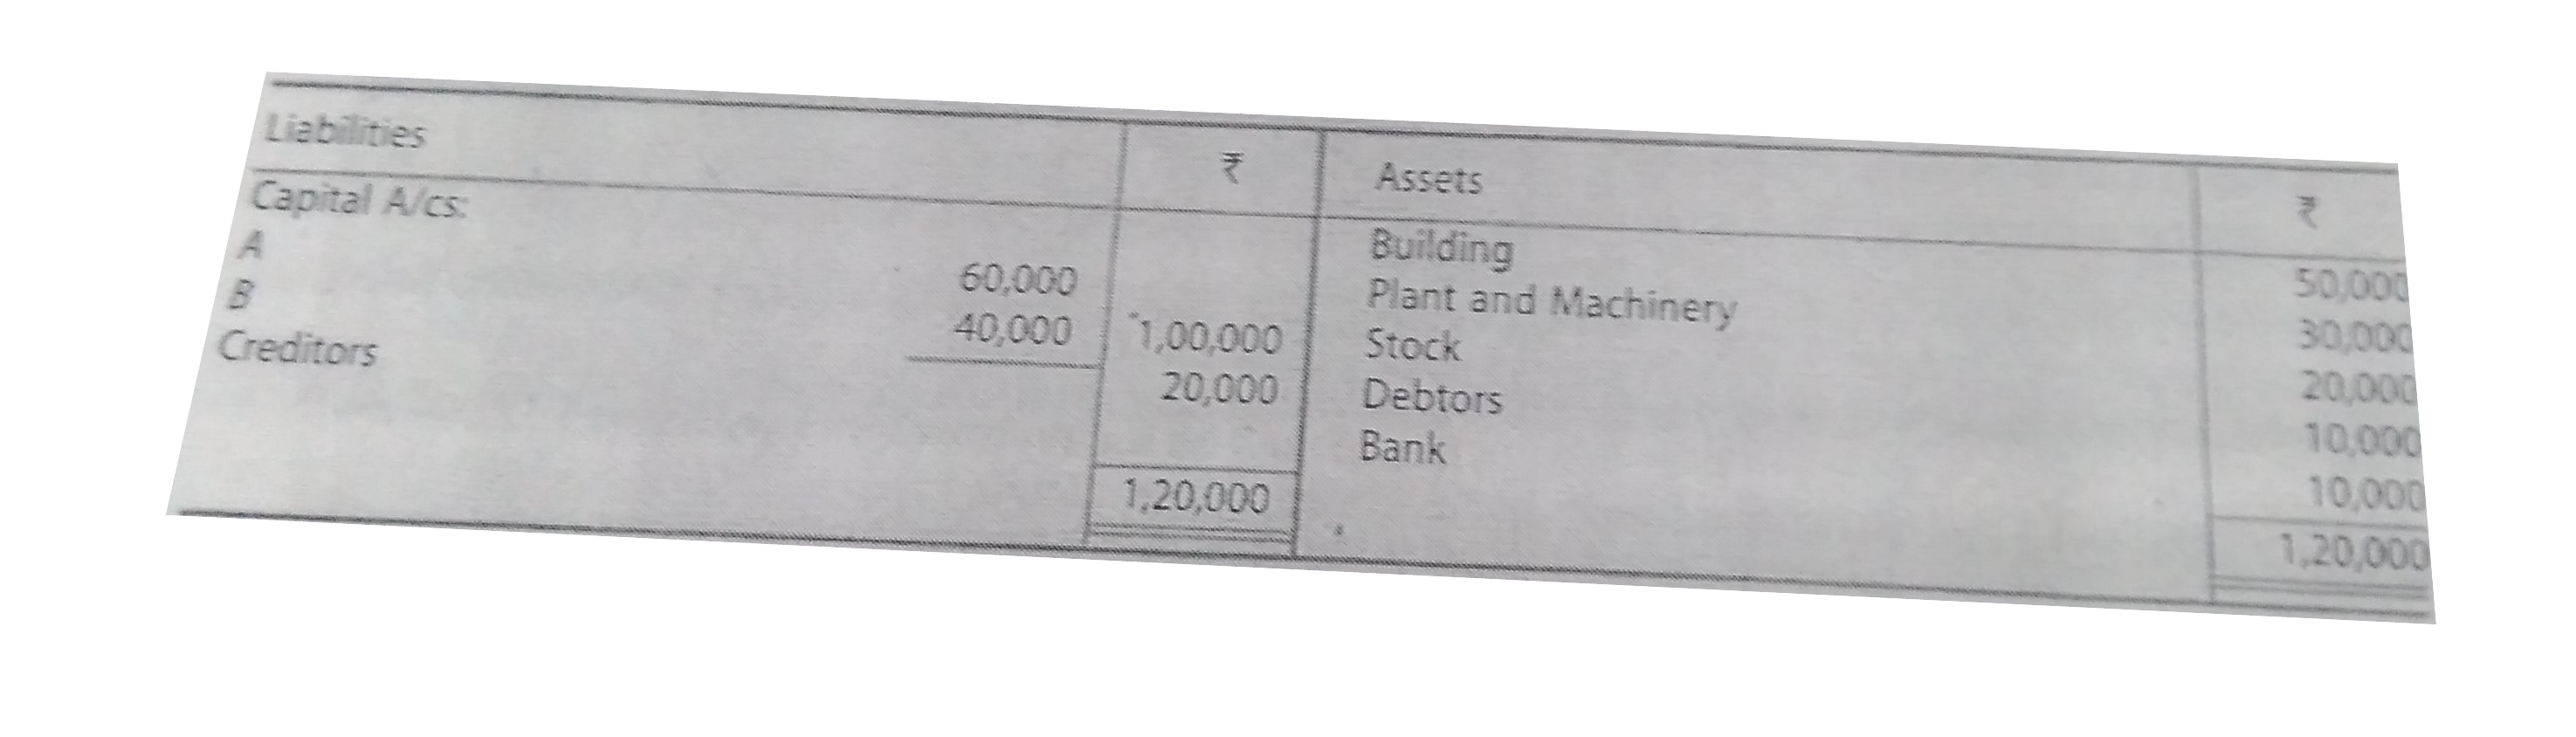 A and B are partners in a firm shaing profits in the ratio of 3 : 2. They admit C as a partner on 1st April, 2019 on which date the Balance Sheet of the firm was:      You are required to parpare the Revaluation Account, Partners' Capital Accounts and Balance Sheet of the new firm after considering the following:   (a) C brings RS.30,000 as Capital for 1/4th share. He also brings RS.10,000 for his for share of goodwill.   (b) Part of the Stock which had been included at cost of RS.2,000 had been badly damaged in storage and could only expect to realise RS.400.   (c) Bank changes had been overlooked and amounted to RS.200 for the year 2018-19.   (d) Depreciation on Building of RS.3,000  had been omitted for the year 2018-19.   (e) A credit for goods for RS.800 had been omitted from both purchases and creditors although the goods had been correctly included in Stock.   (f) An expense of RS.1,200 for insurance premium was debited in the Profit and Loss Account of 2018-19 but RS.600 of this are related to the period after 31st March, 2019.